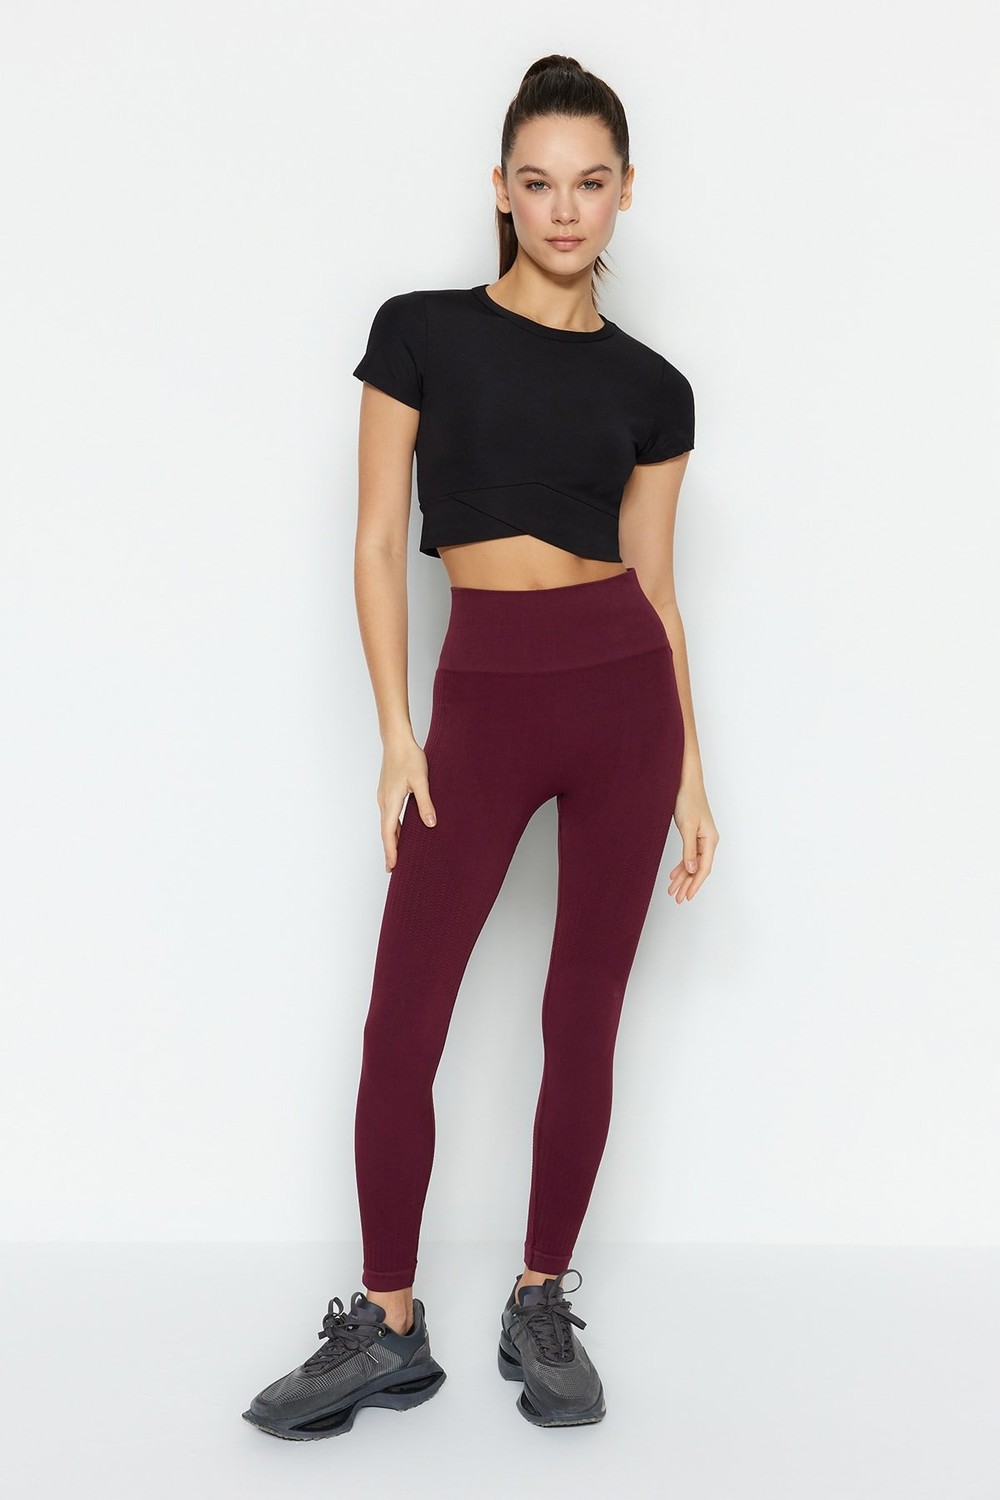 Jerf Lily - Burgundy High Waist Consolidating Leggings